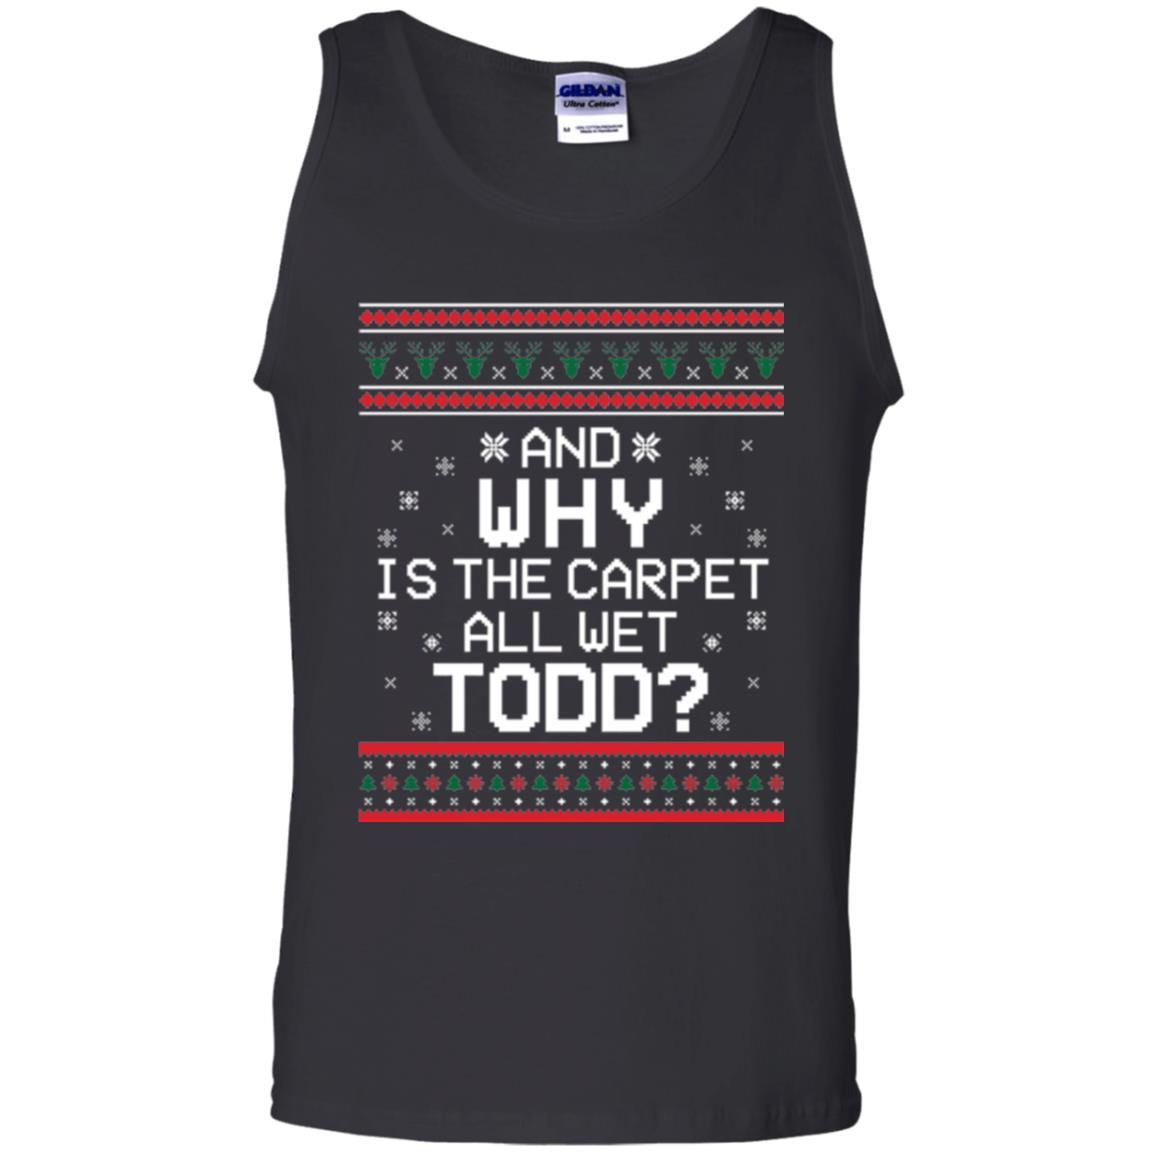 Christmas T-shirt And Why Is The Carpet All Wet Todd